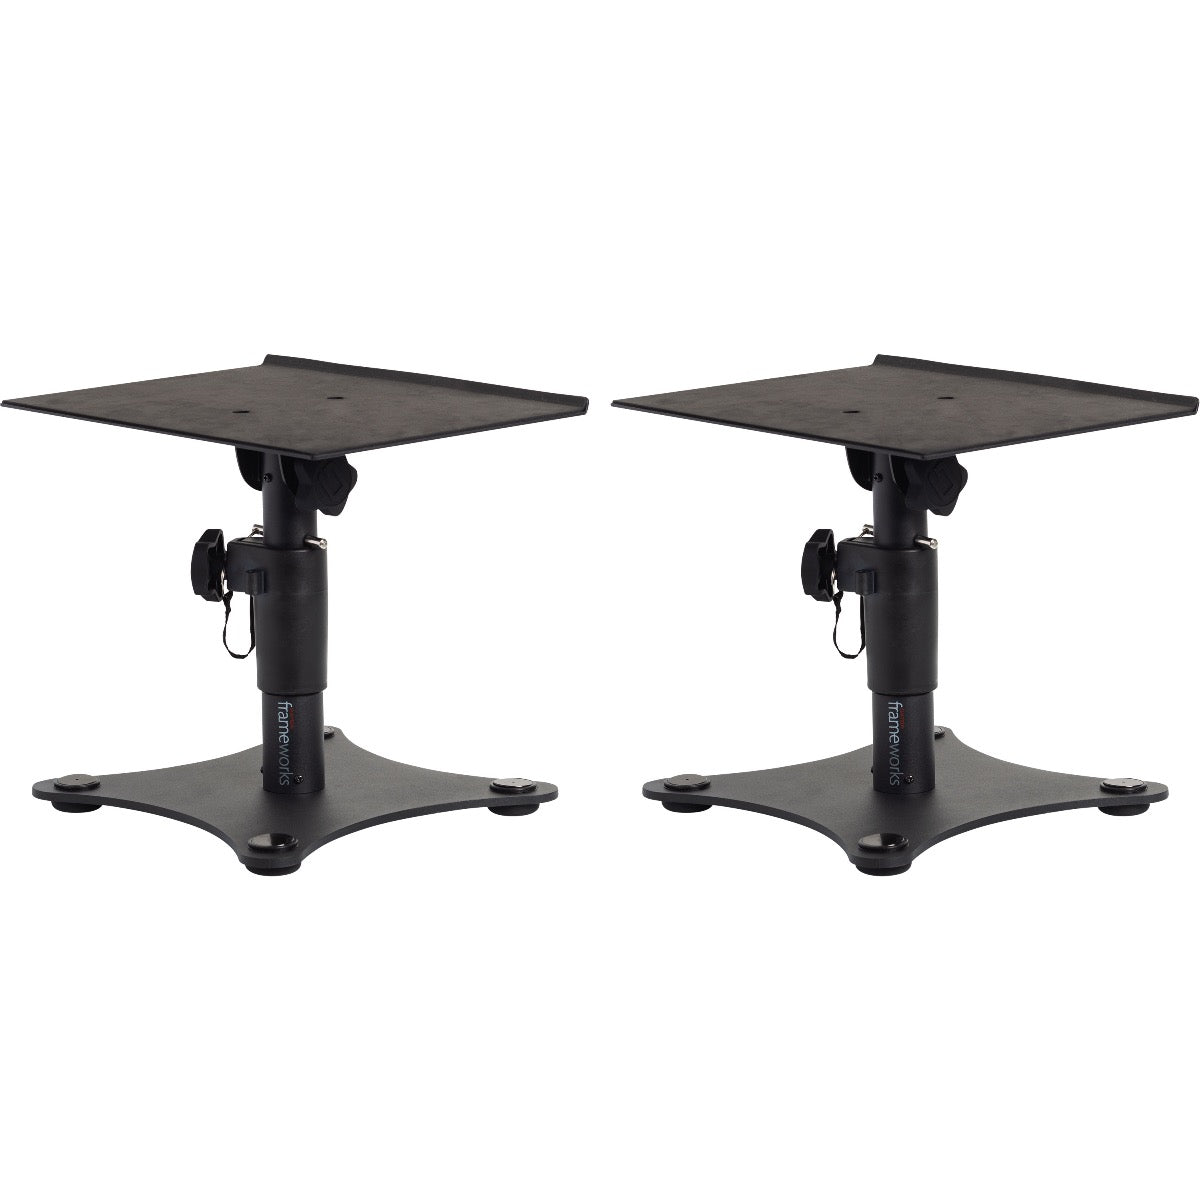 3/4 view of Gator Frameworks GFWSPKSTMNDSK Desktop Studio Monitor Stands at lowest height setting with top surfaces flat